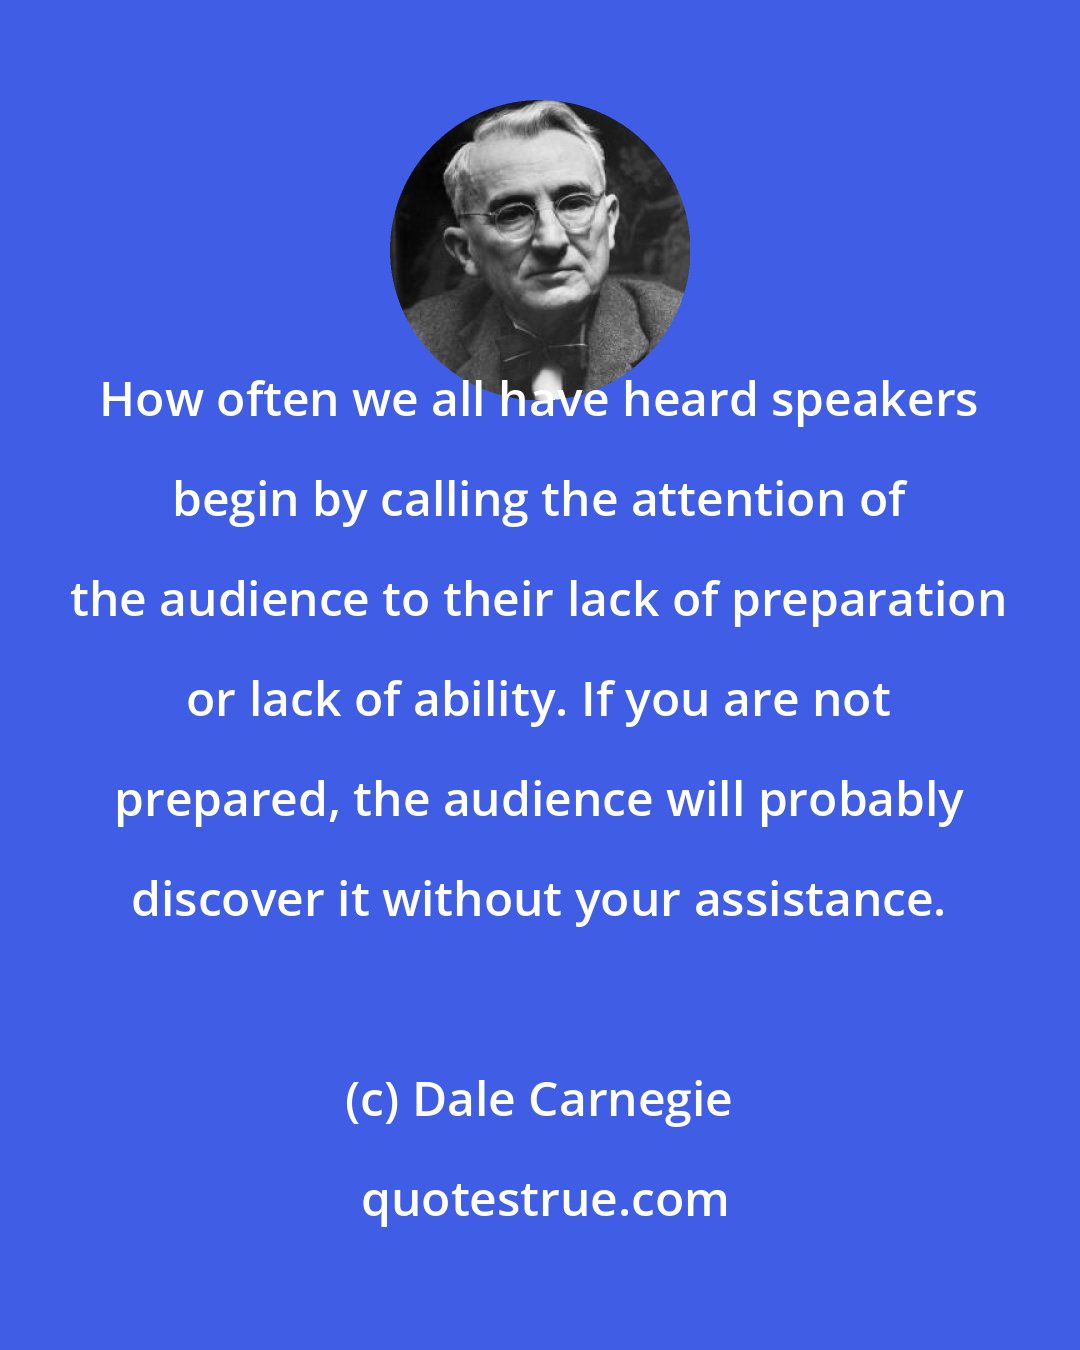 Dale Carnegie: How often we all have heard speakers begin by calling the attention of the audience to their lack of preparation or lack of ability. If you are not prepared, the audience will probably discover it without your assistance.